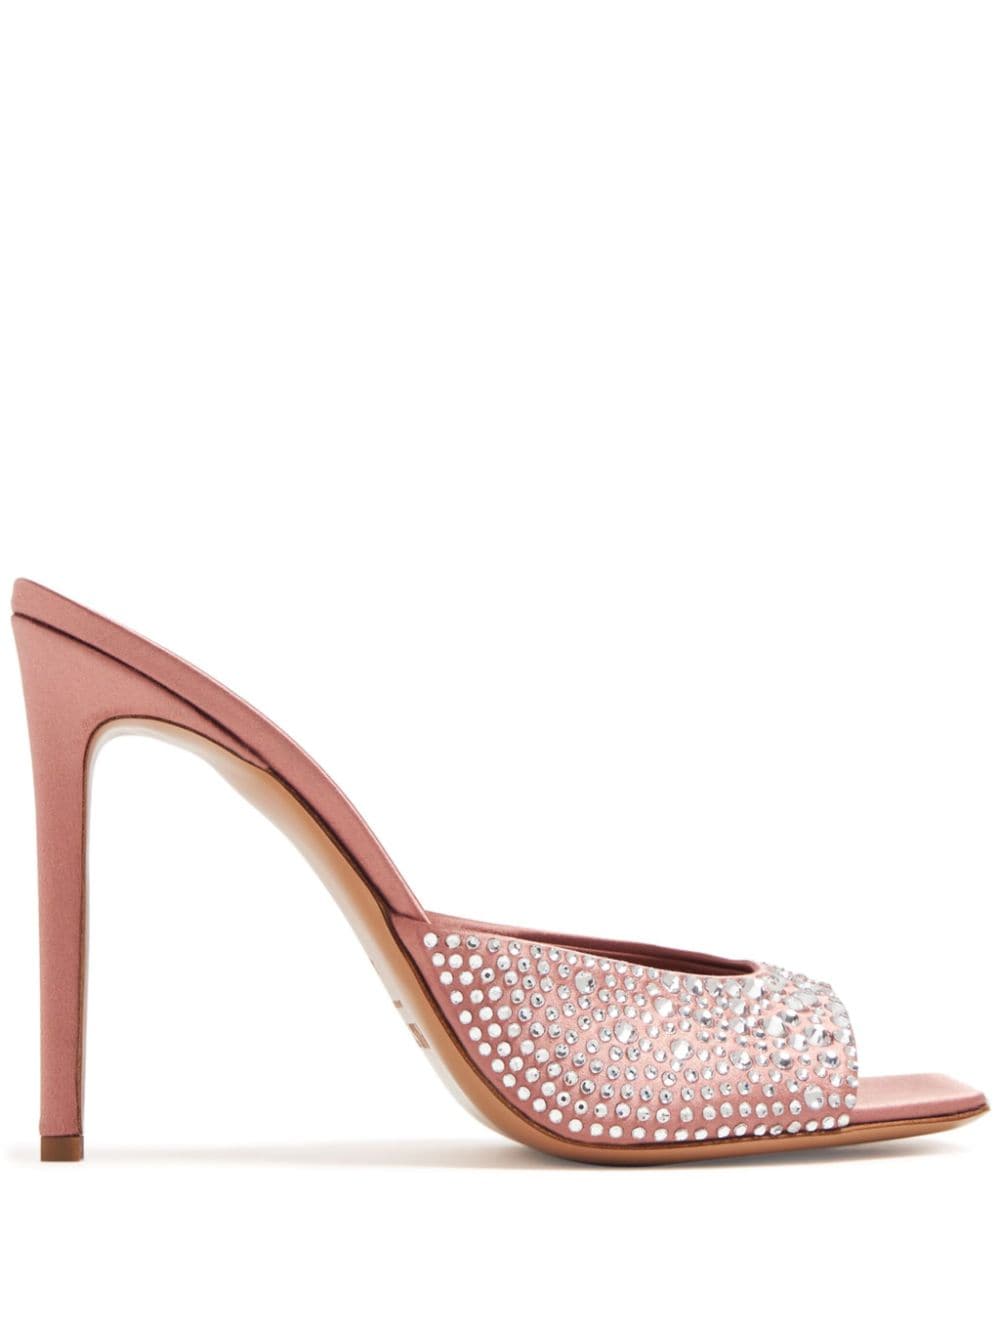 Paris Texas Holly crystal-embellished mules - Pink